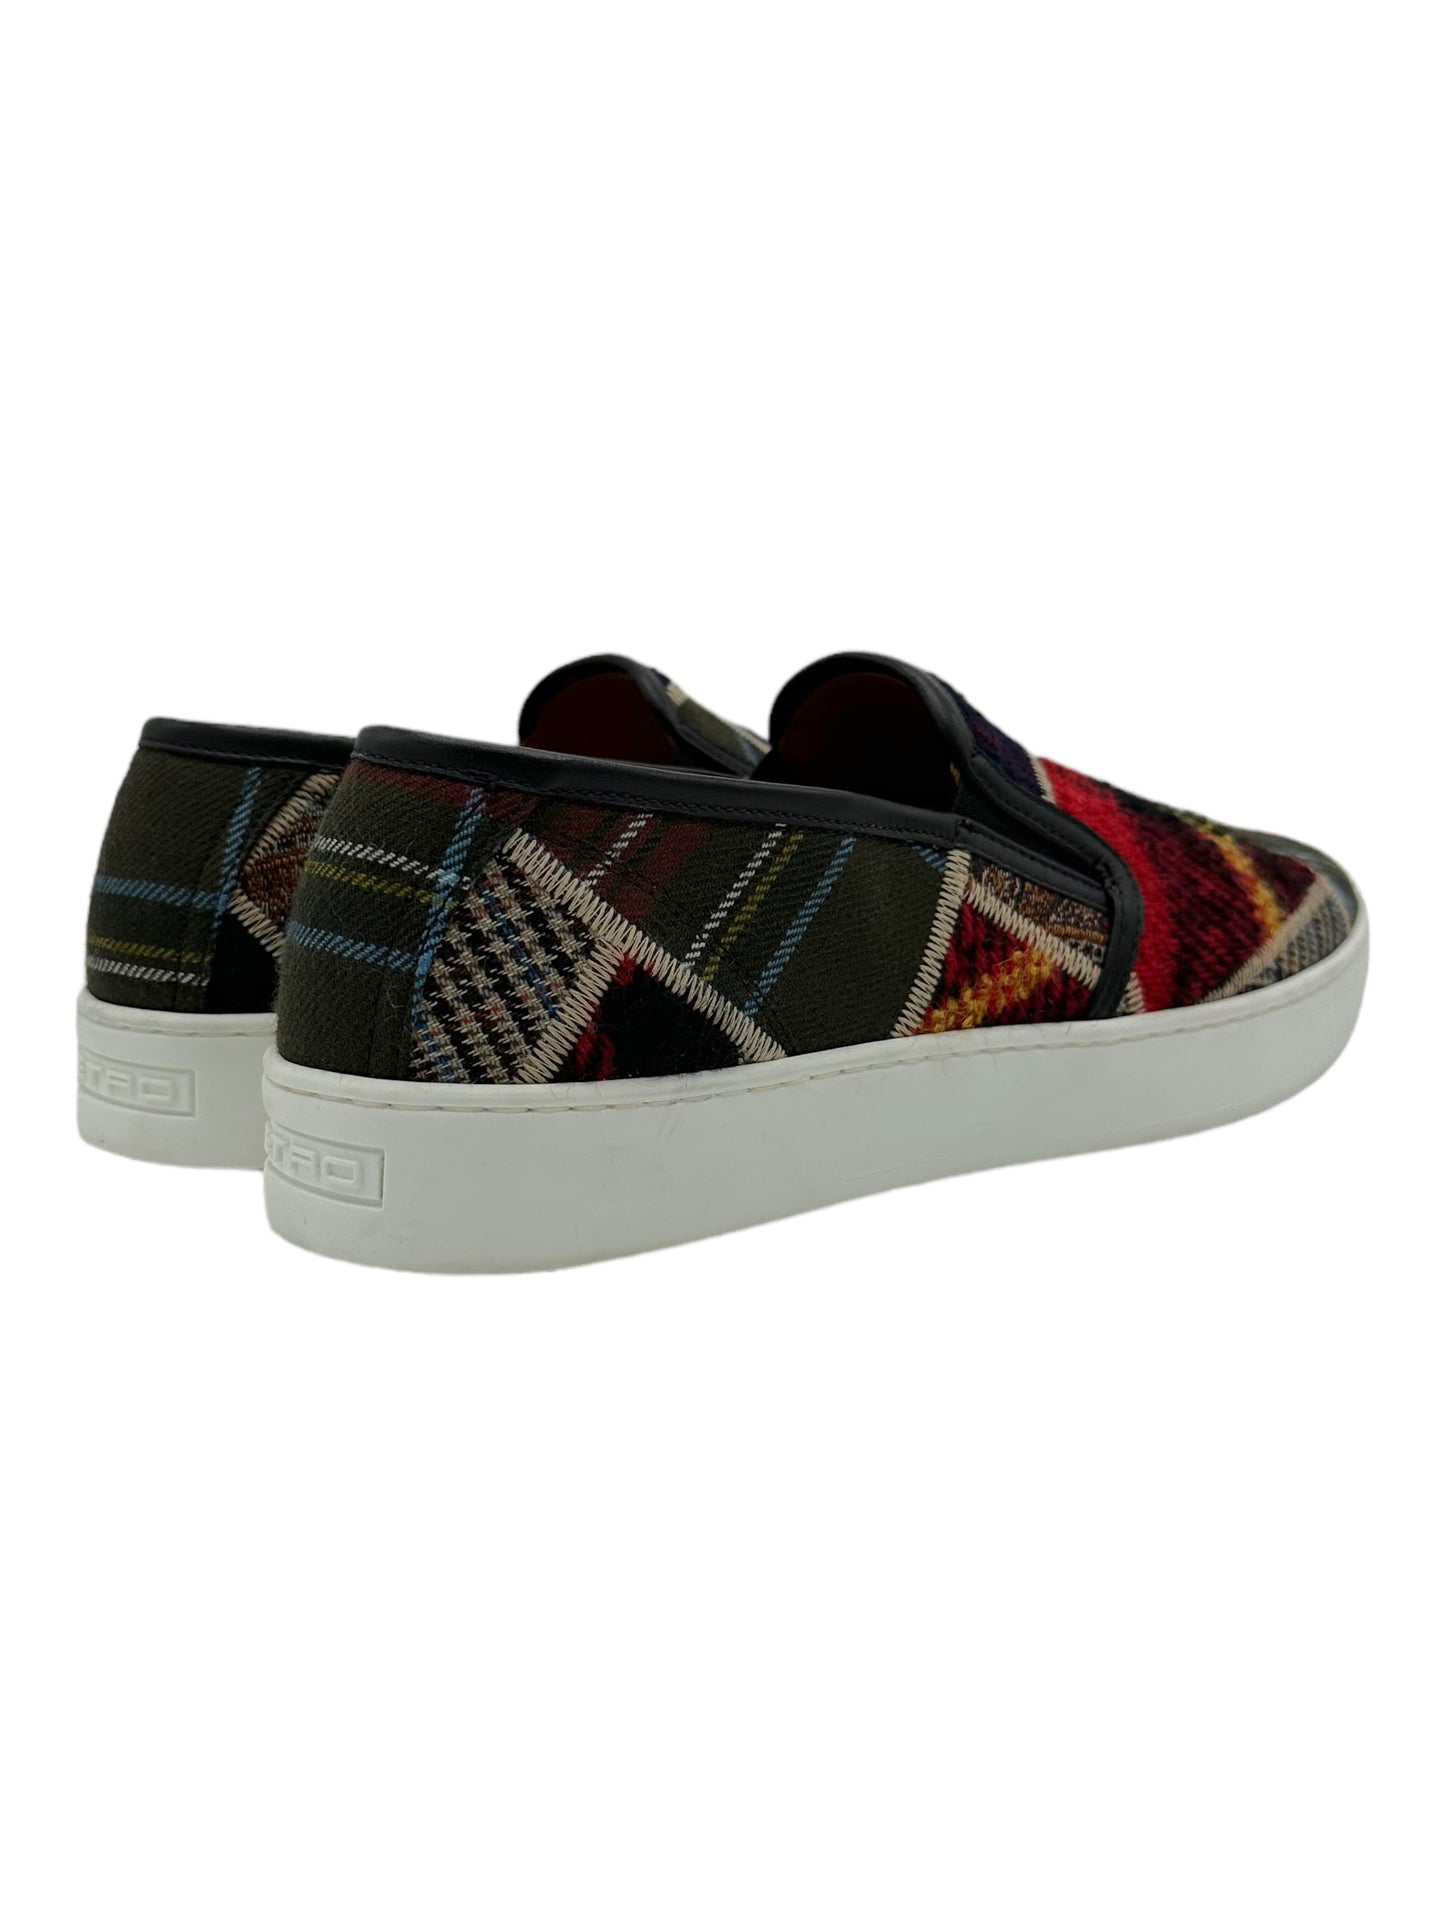 Etro Multicolour Patchwork Slip-On Sneakers - Genuine Design Luxury Consignment for Men. New & Pre-Owned Clothing, Shoes, & Accessories. Calgary, Canada